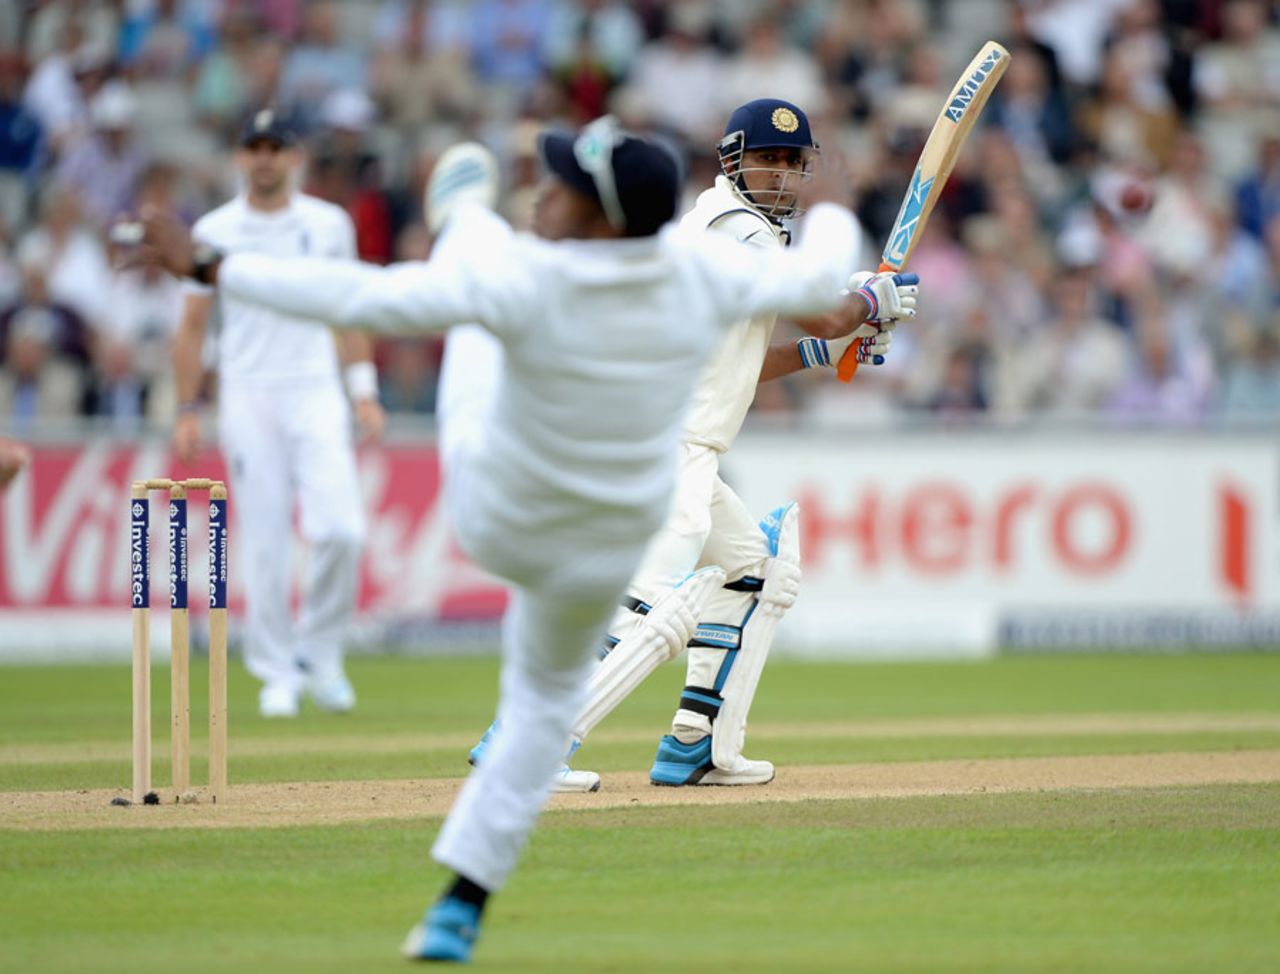 MS Dhoni survived a tough chance to third slip, England v India, 4th Test, Old Trafford, 1st day, August 7, 2014